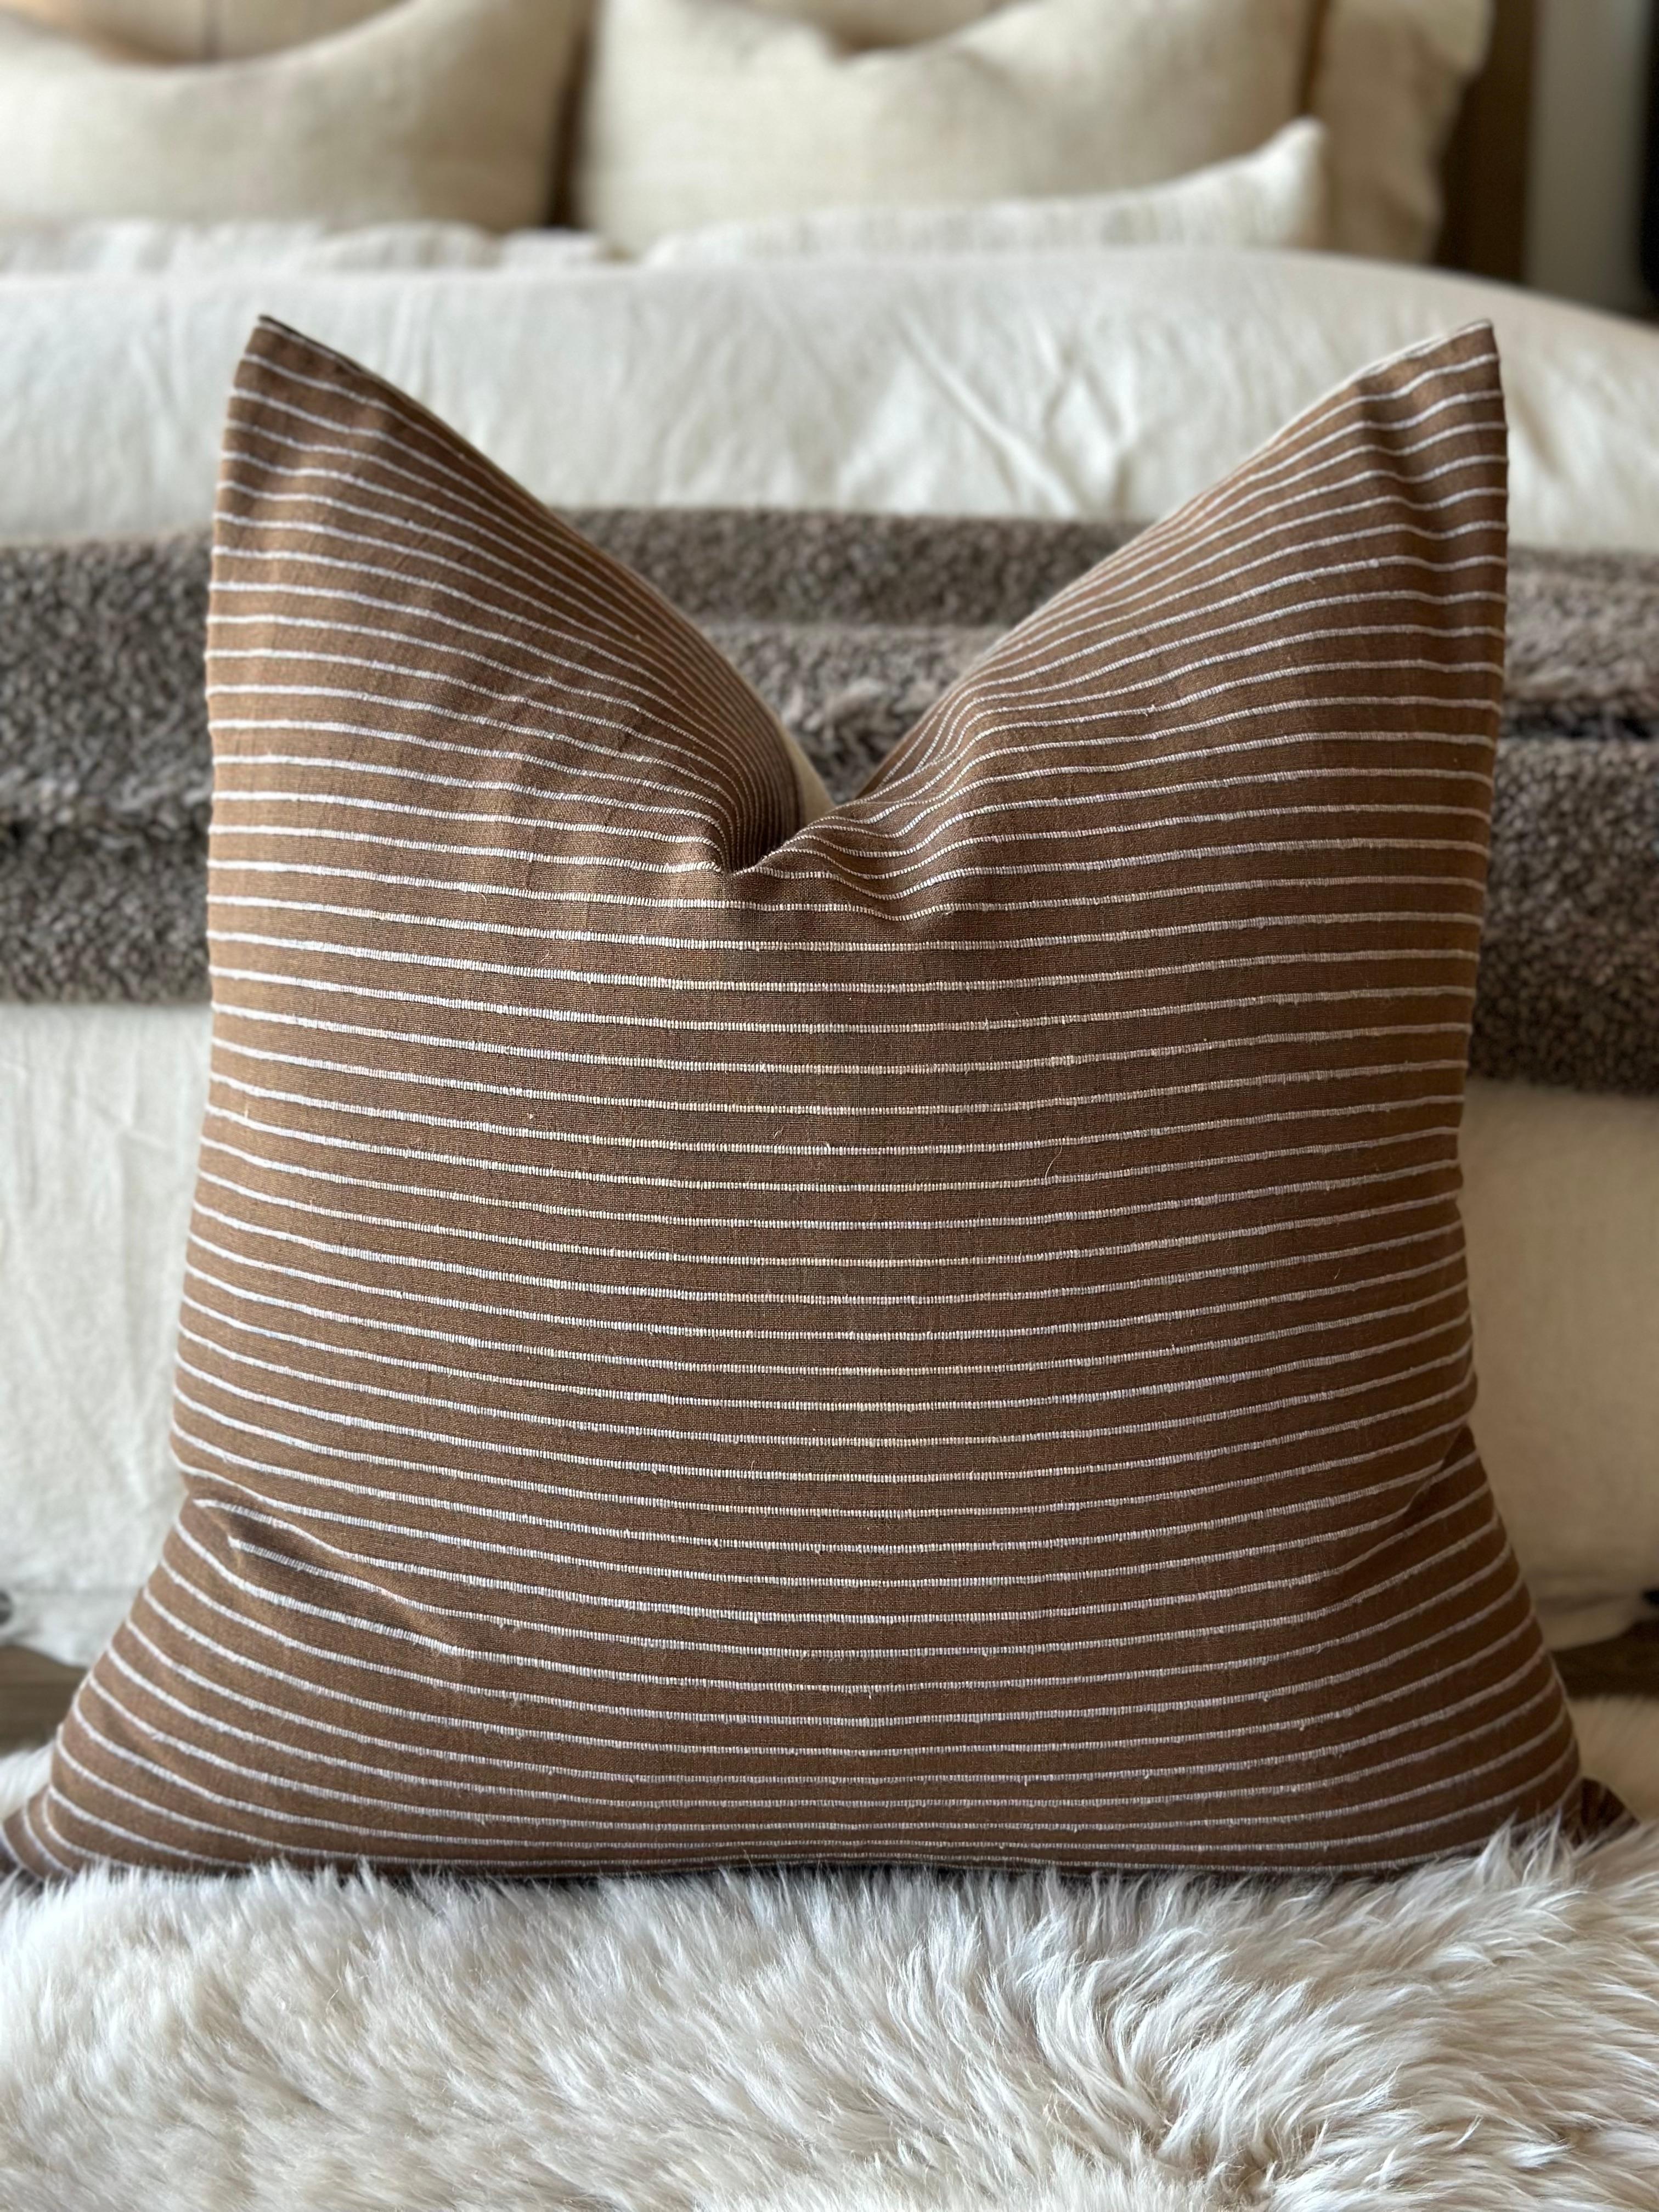 Whittier Brown and Cream Stripe Linen Pillow with Down Insert In New Condition For Sale In Brea, CA